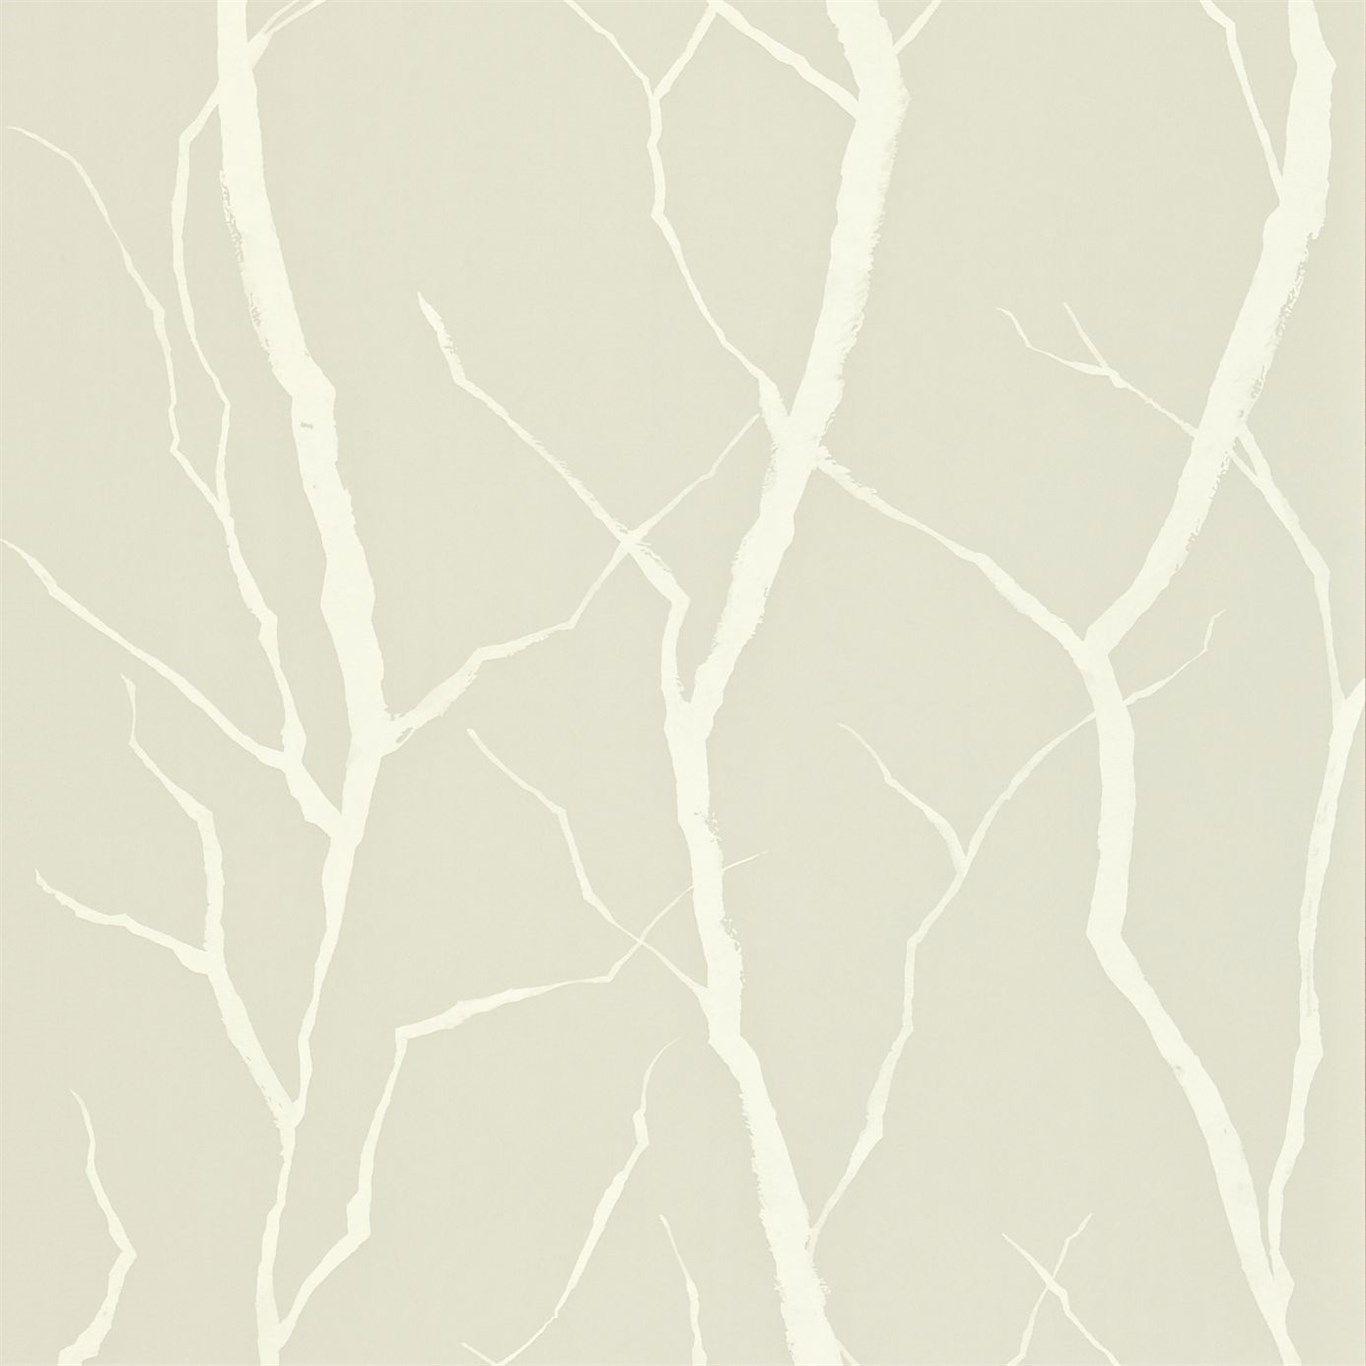 Branches Wallpapers - Wallpaper Cave